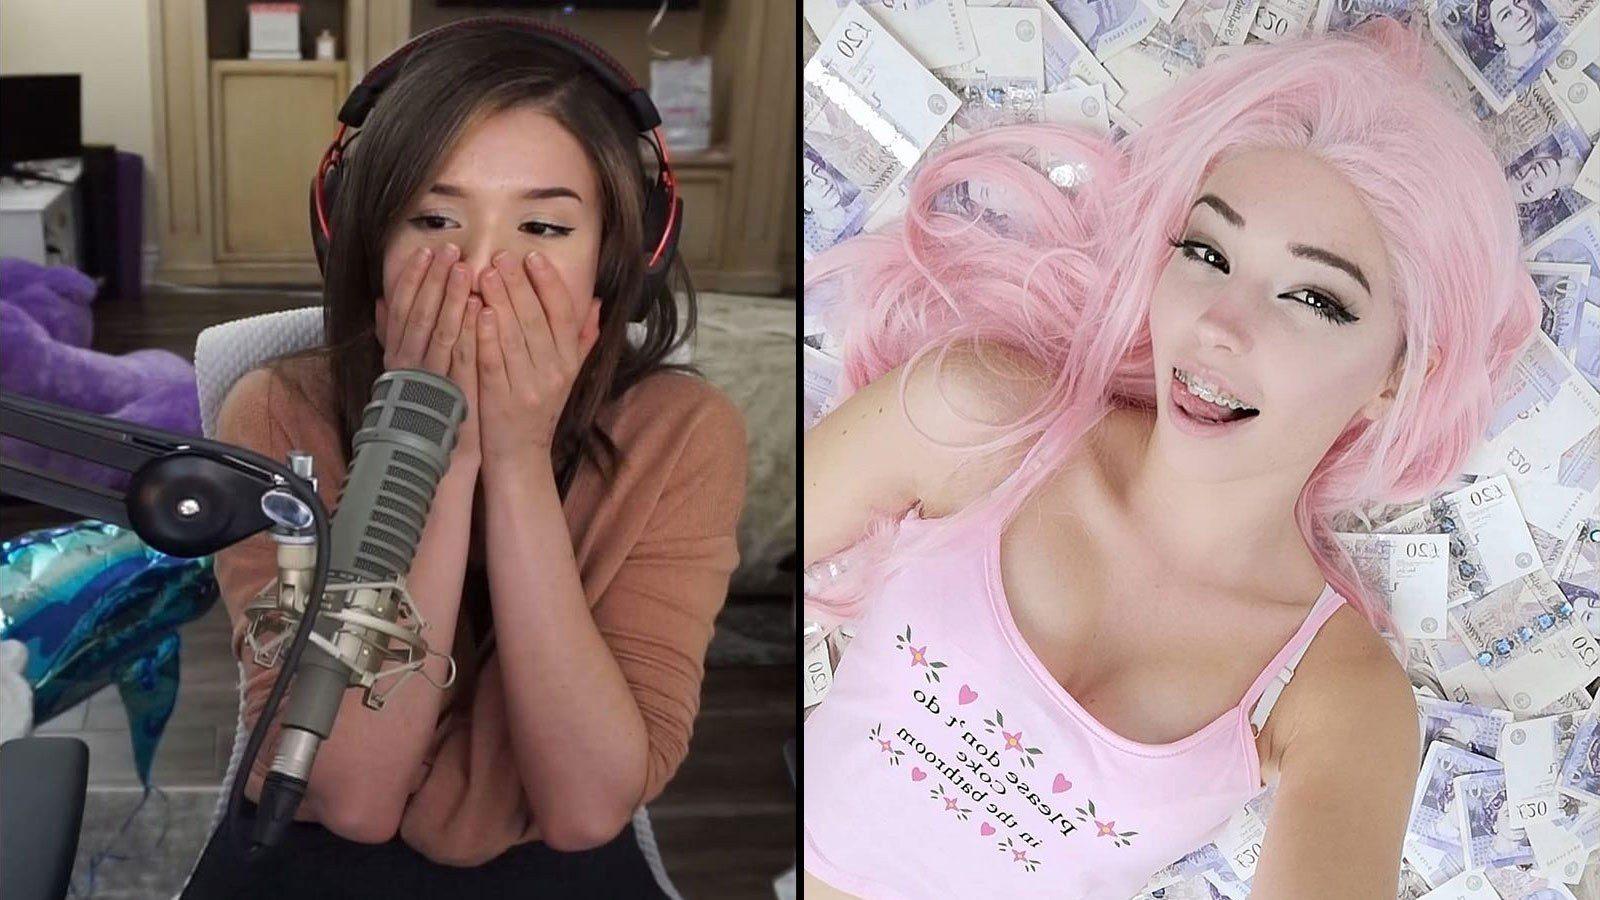 Why are Belle Delphine and Twomad trending?